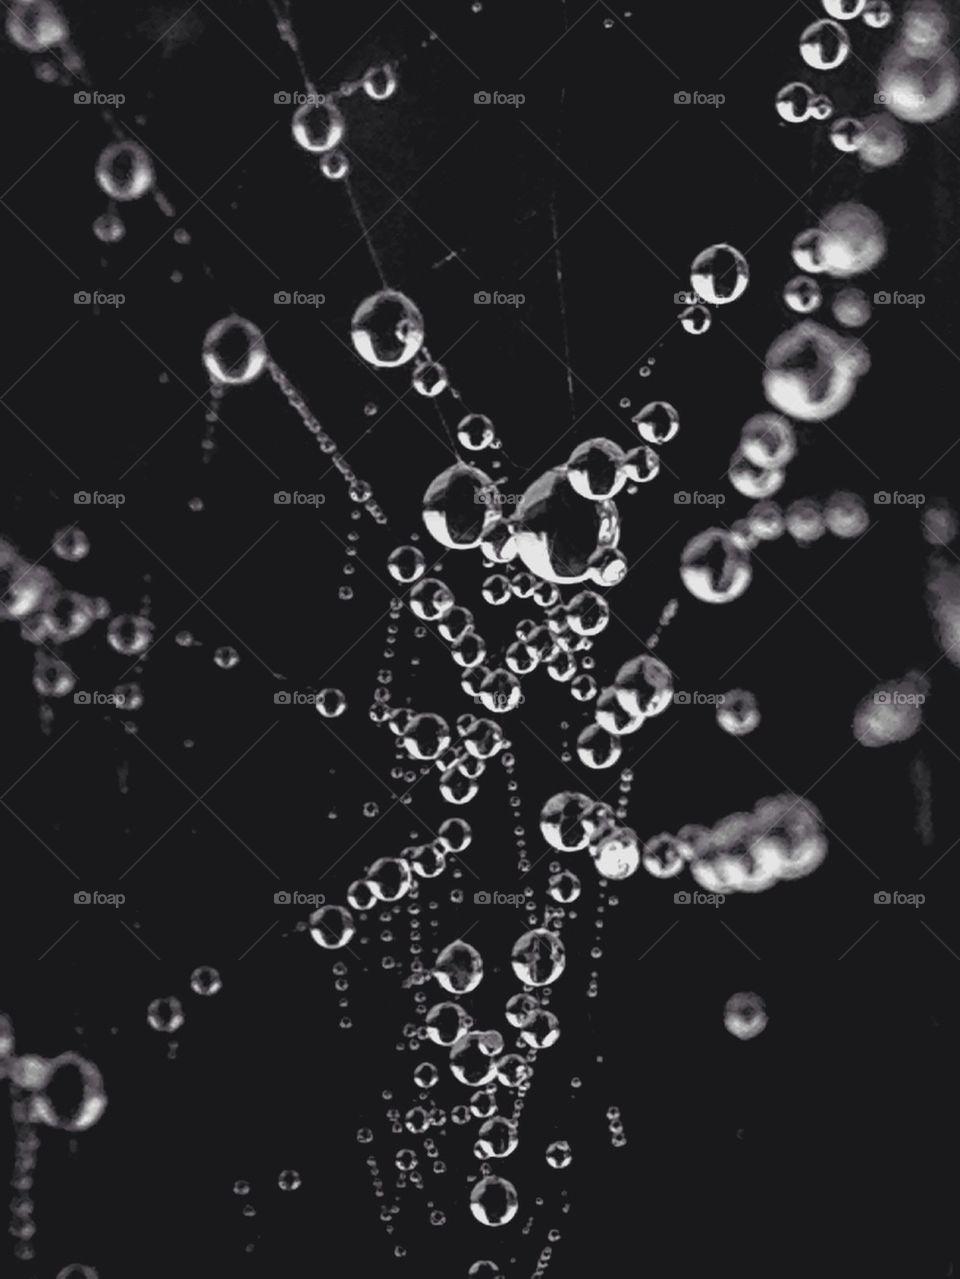 Dew in a spider web 